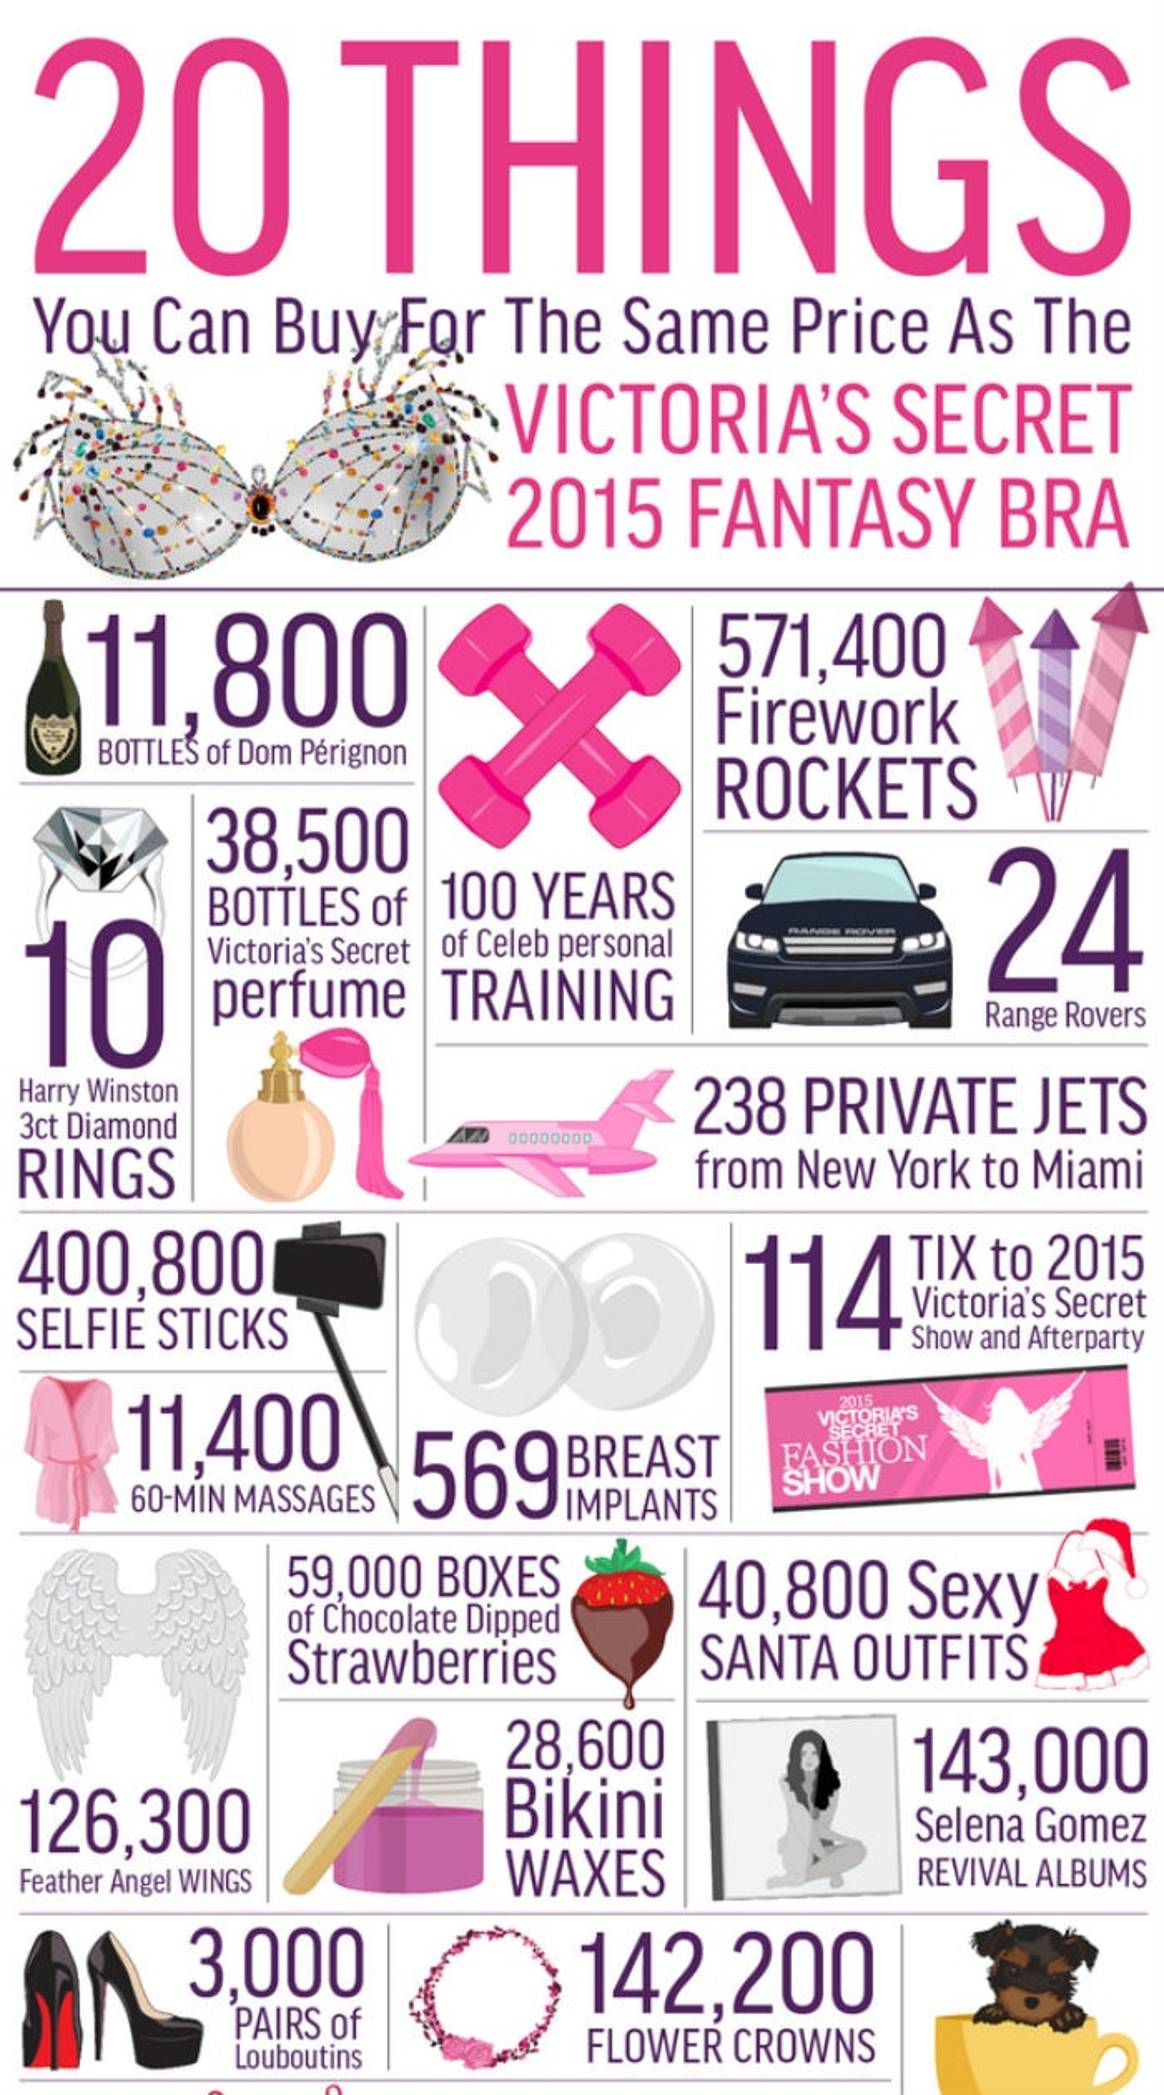 Infographic - 20 things you can get for the price of the Victoria's Secret Fantasy Bra